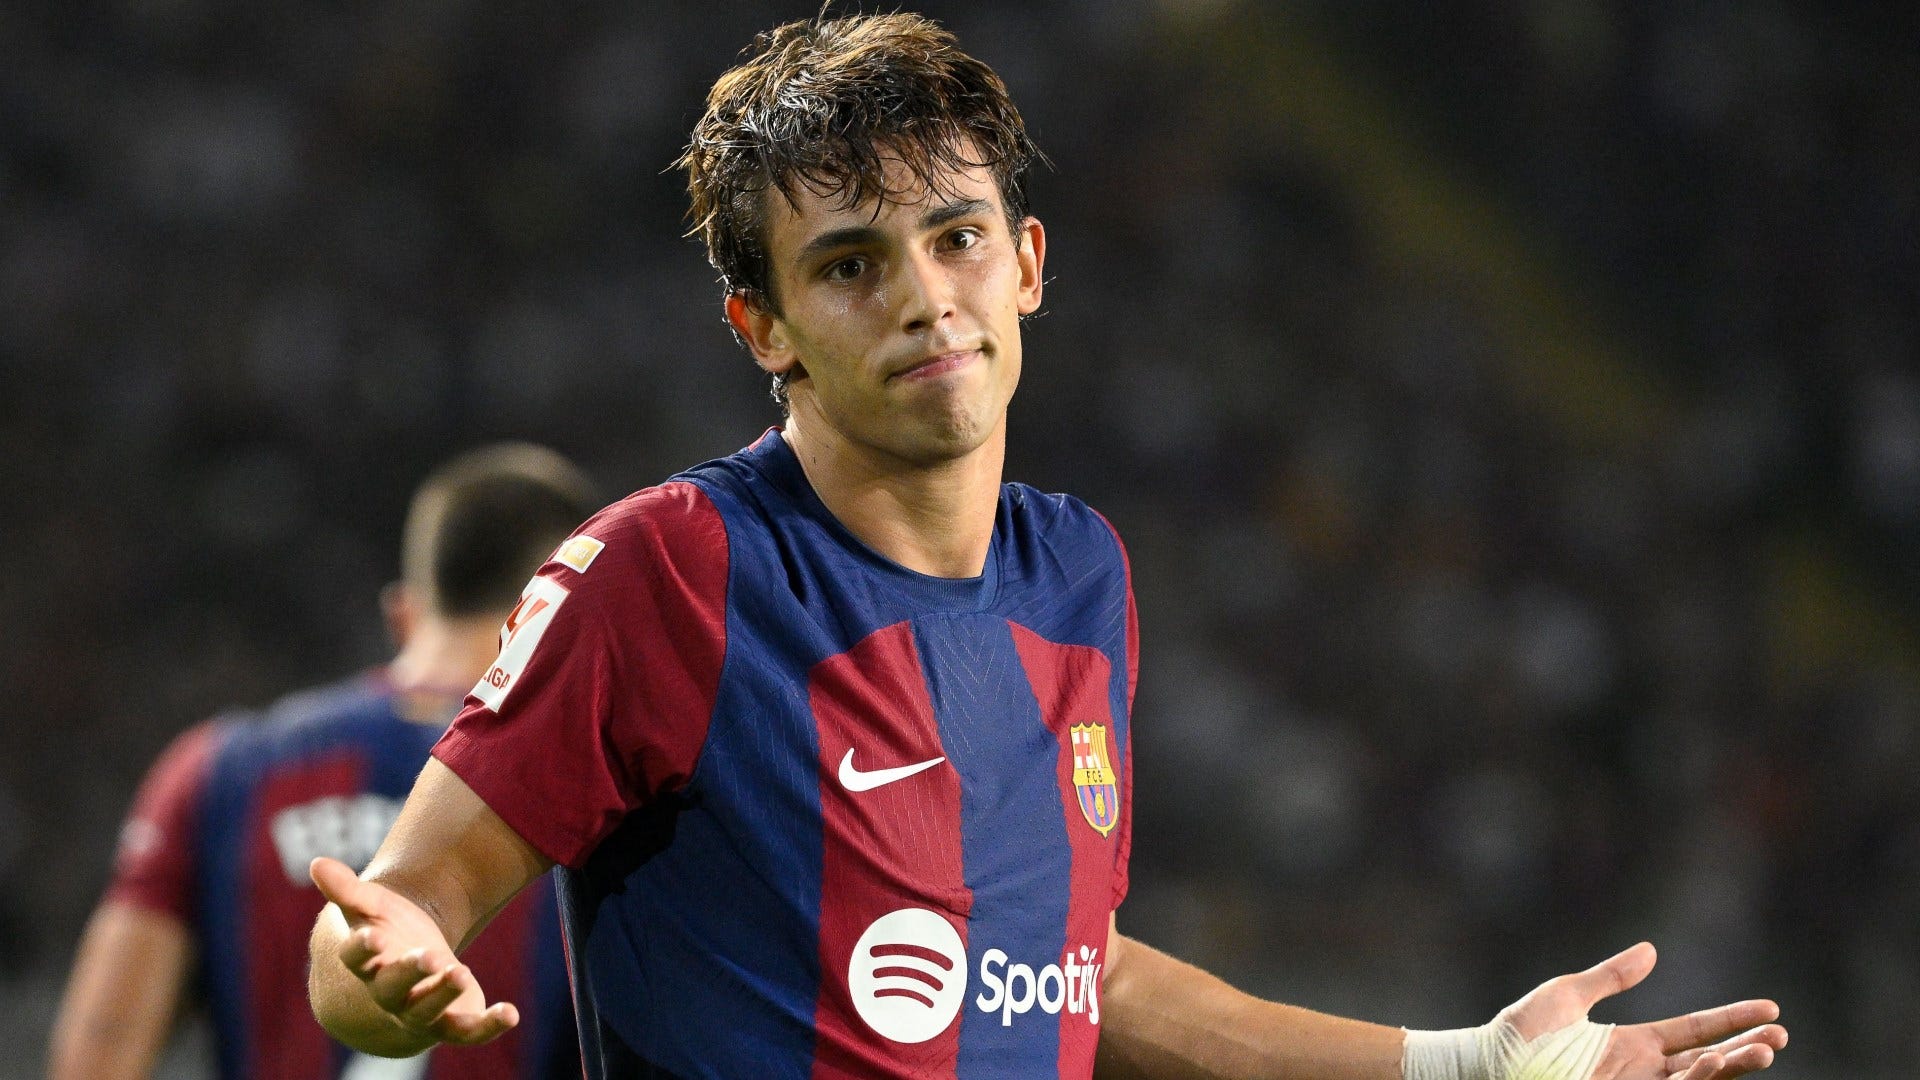 Explained: Why Joao Felix's electric form means Barcelona may struggle to sign the Atletico Madrid loanee on a permanent basis